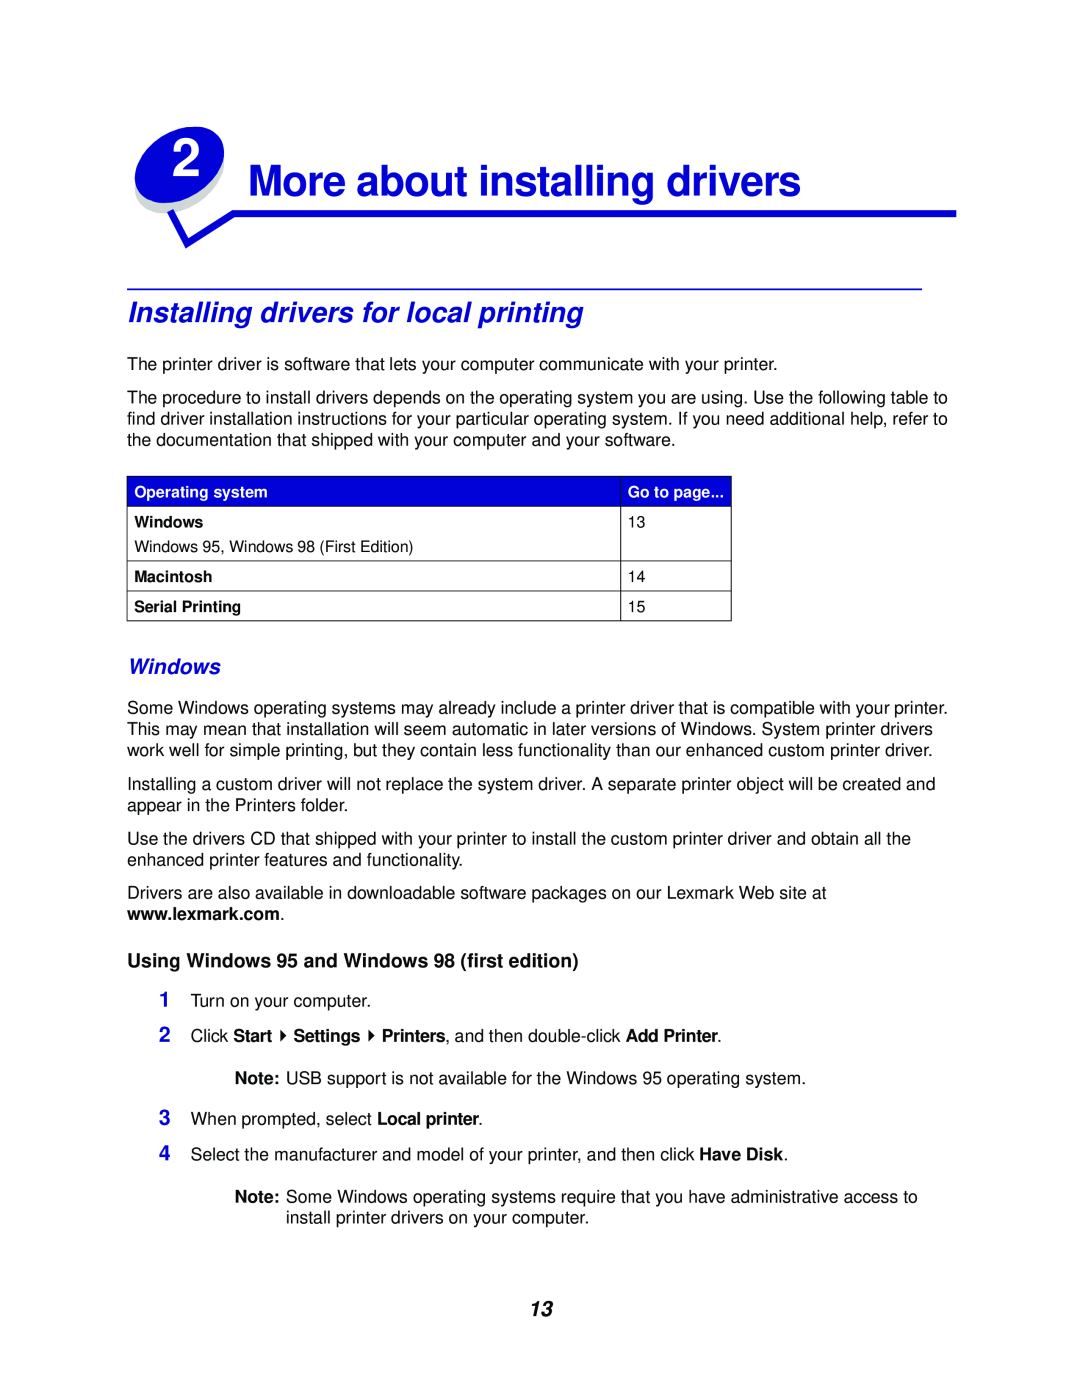 Lexmark 762 manual Installing drivers for local printing, Windows, More about installing drivers 